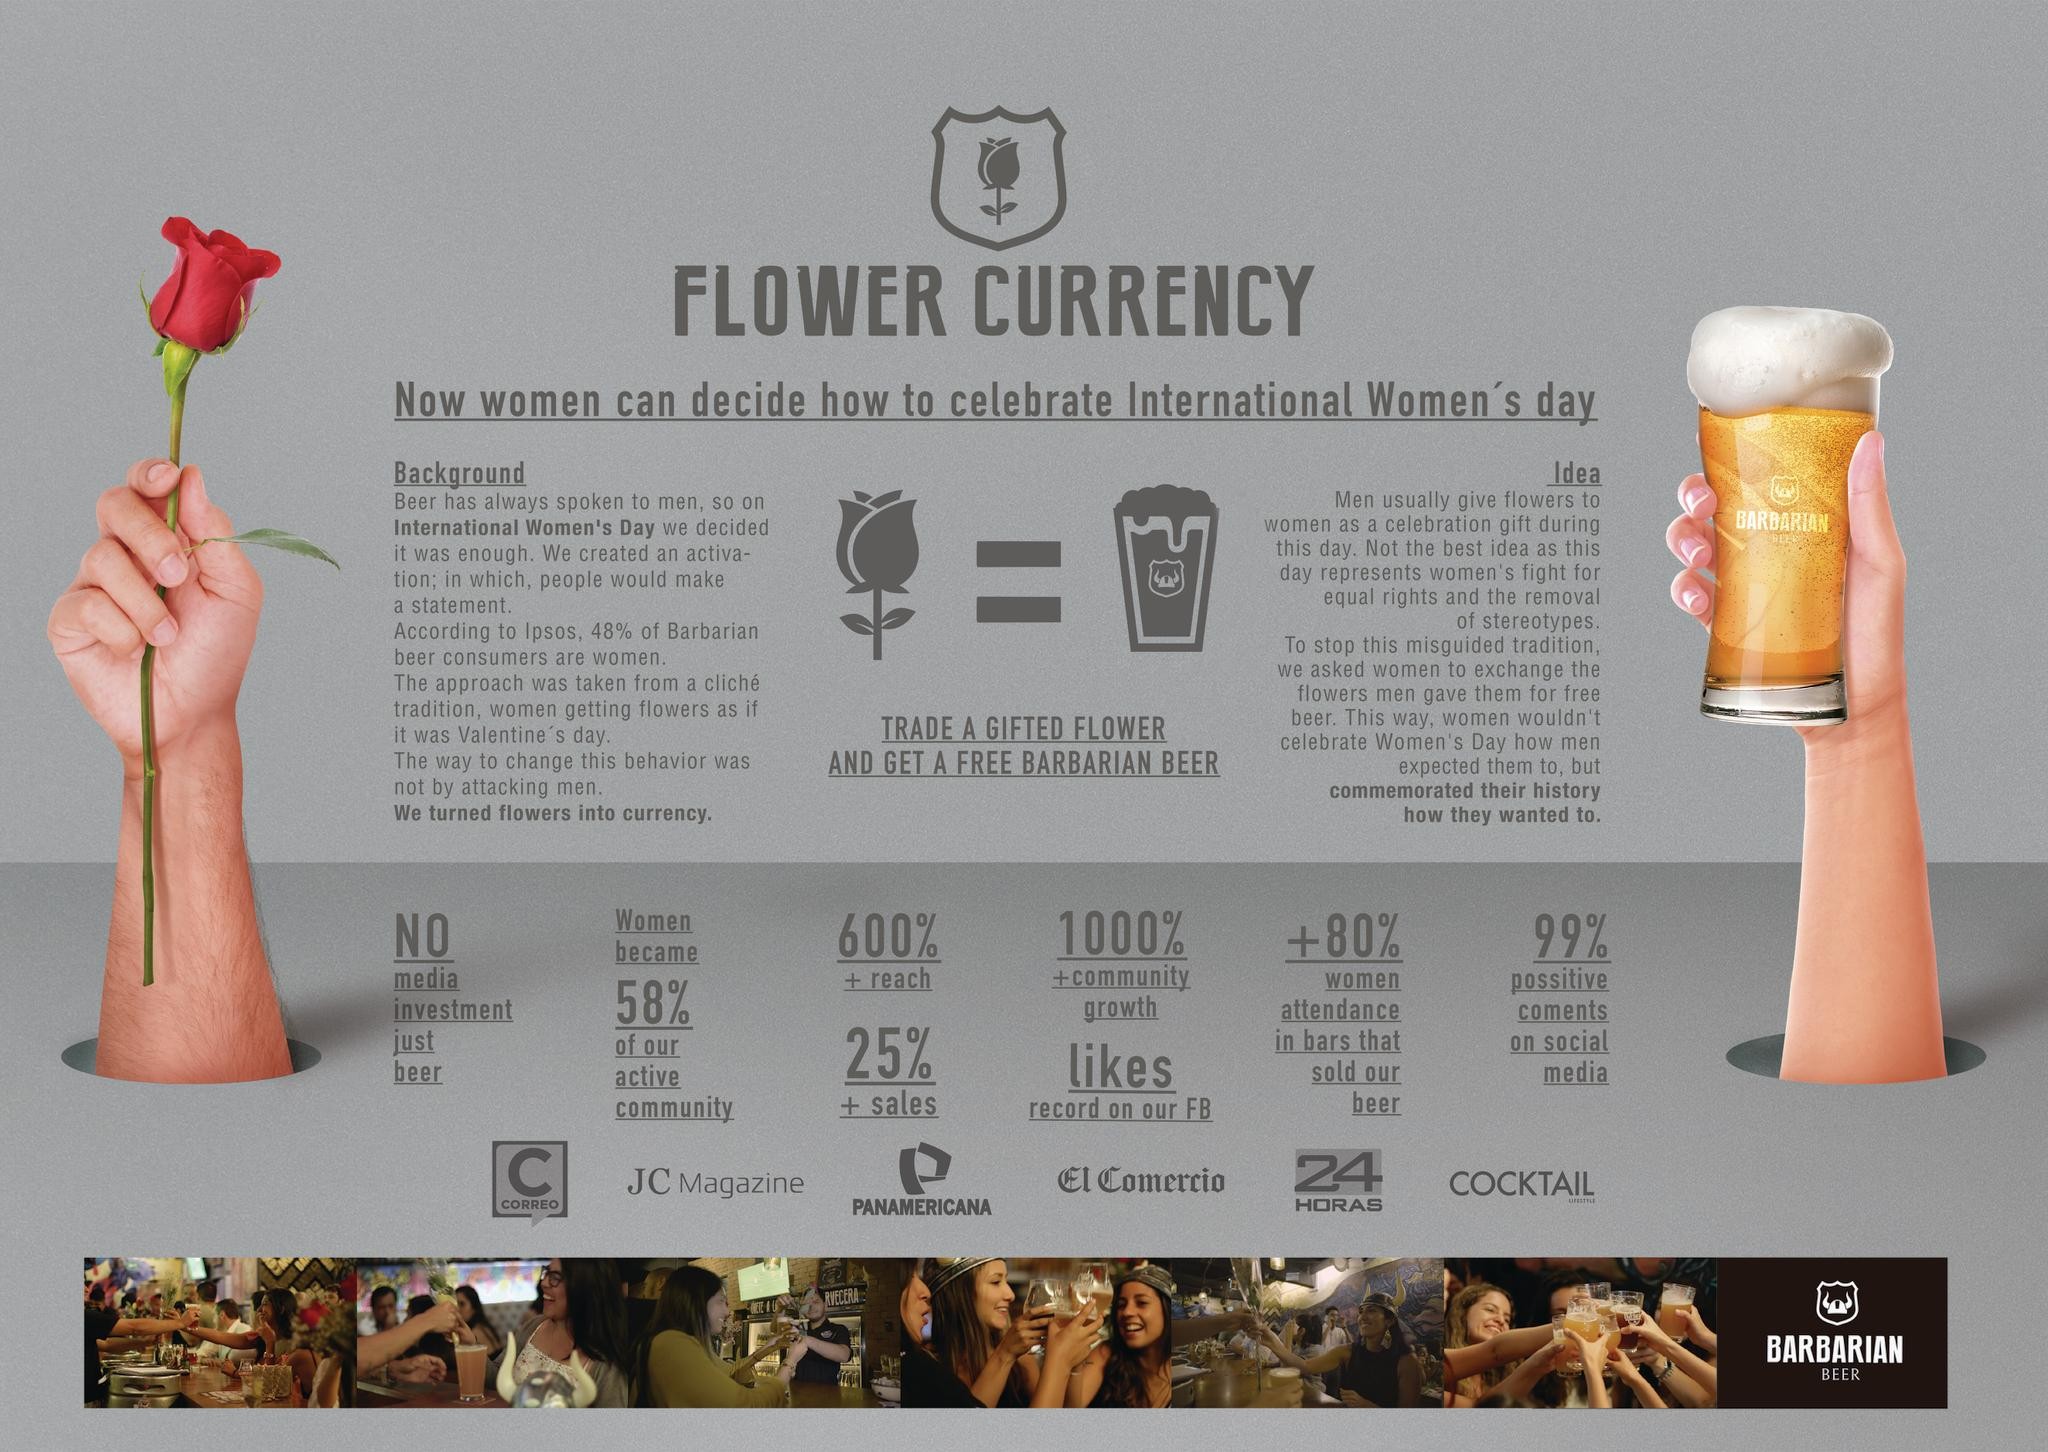 Barbarian Flower Currency